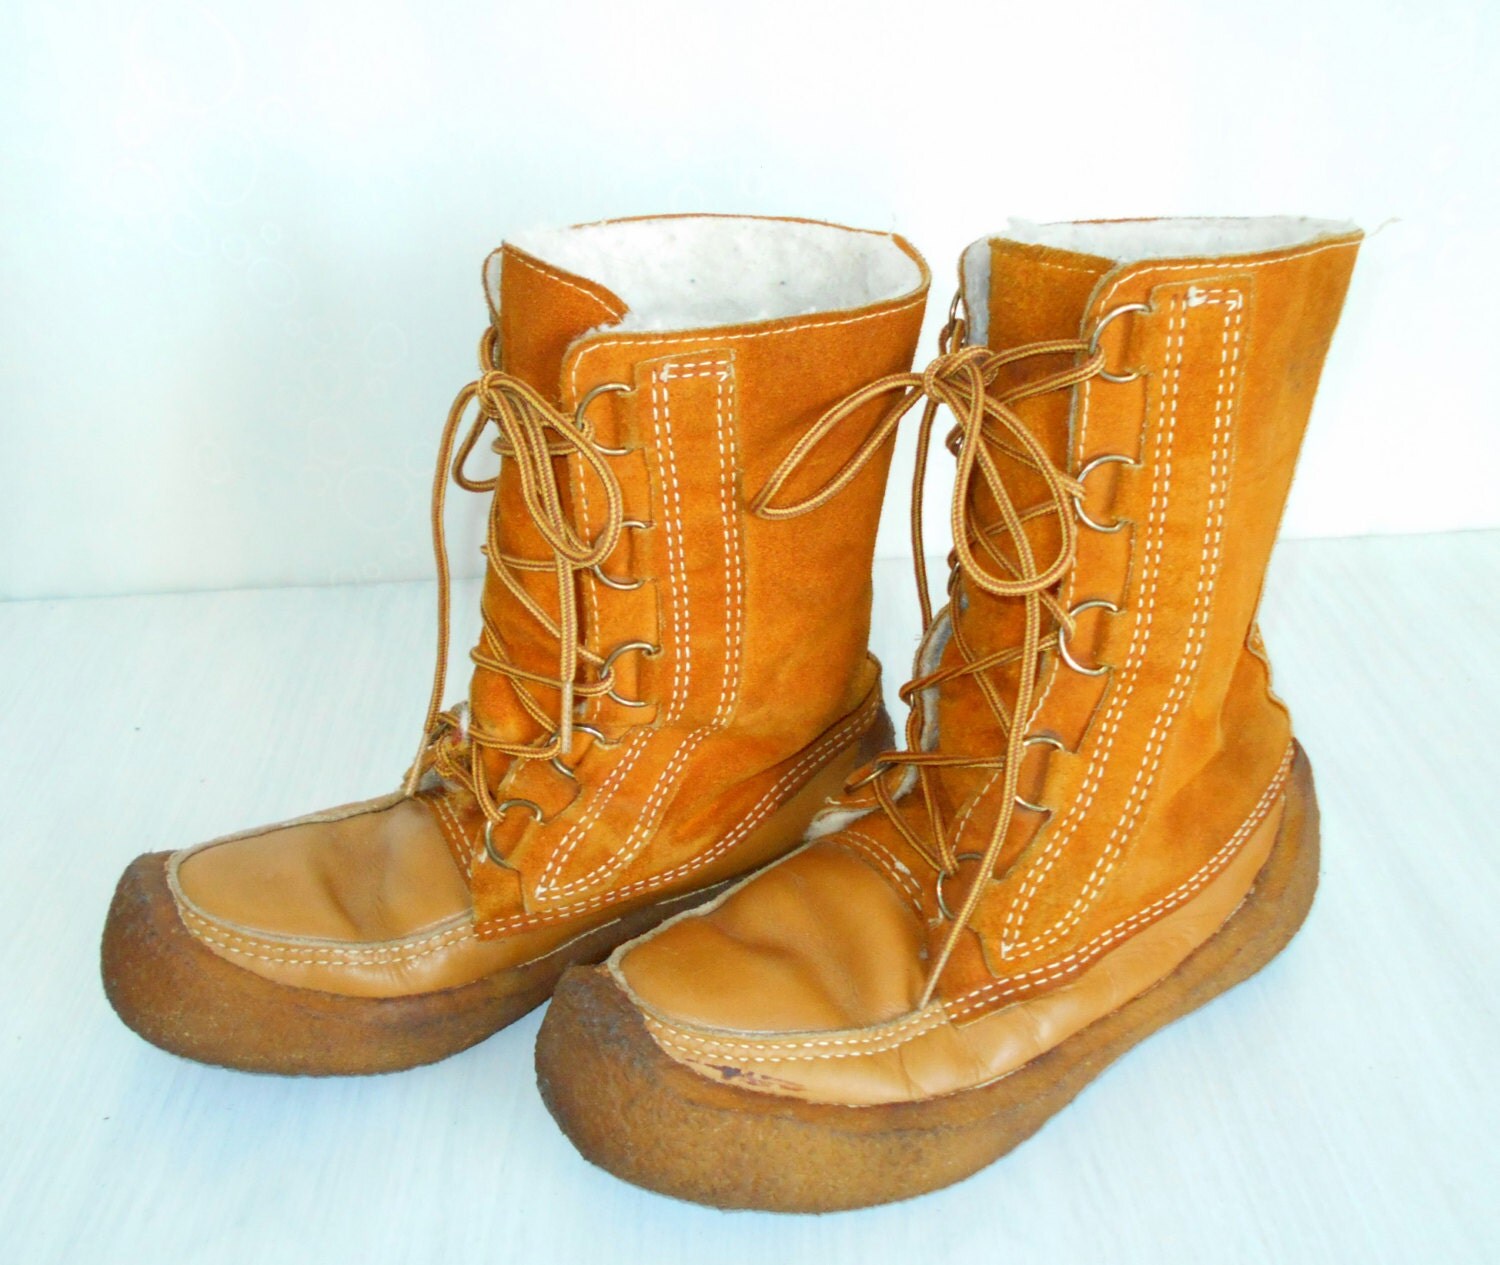 Vintage Canadian Mukluks by Mauricienne